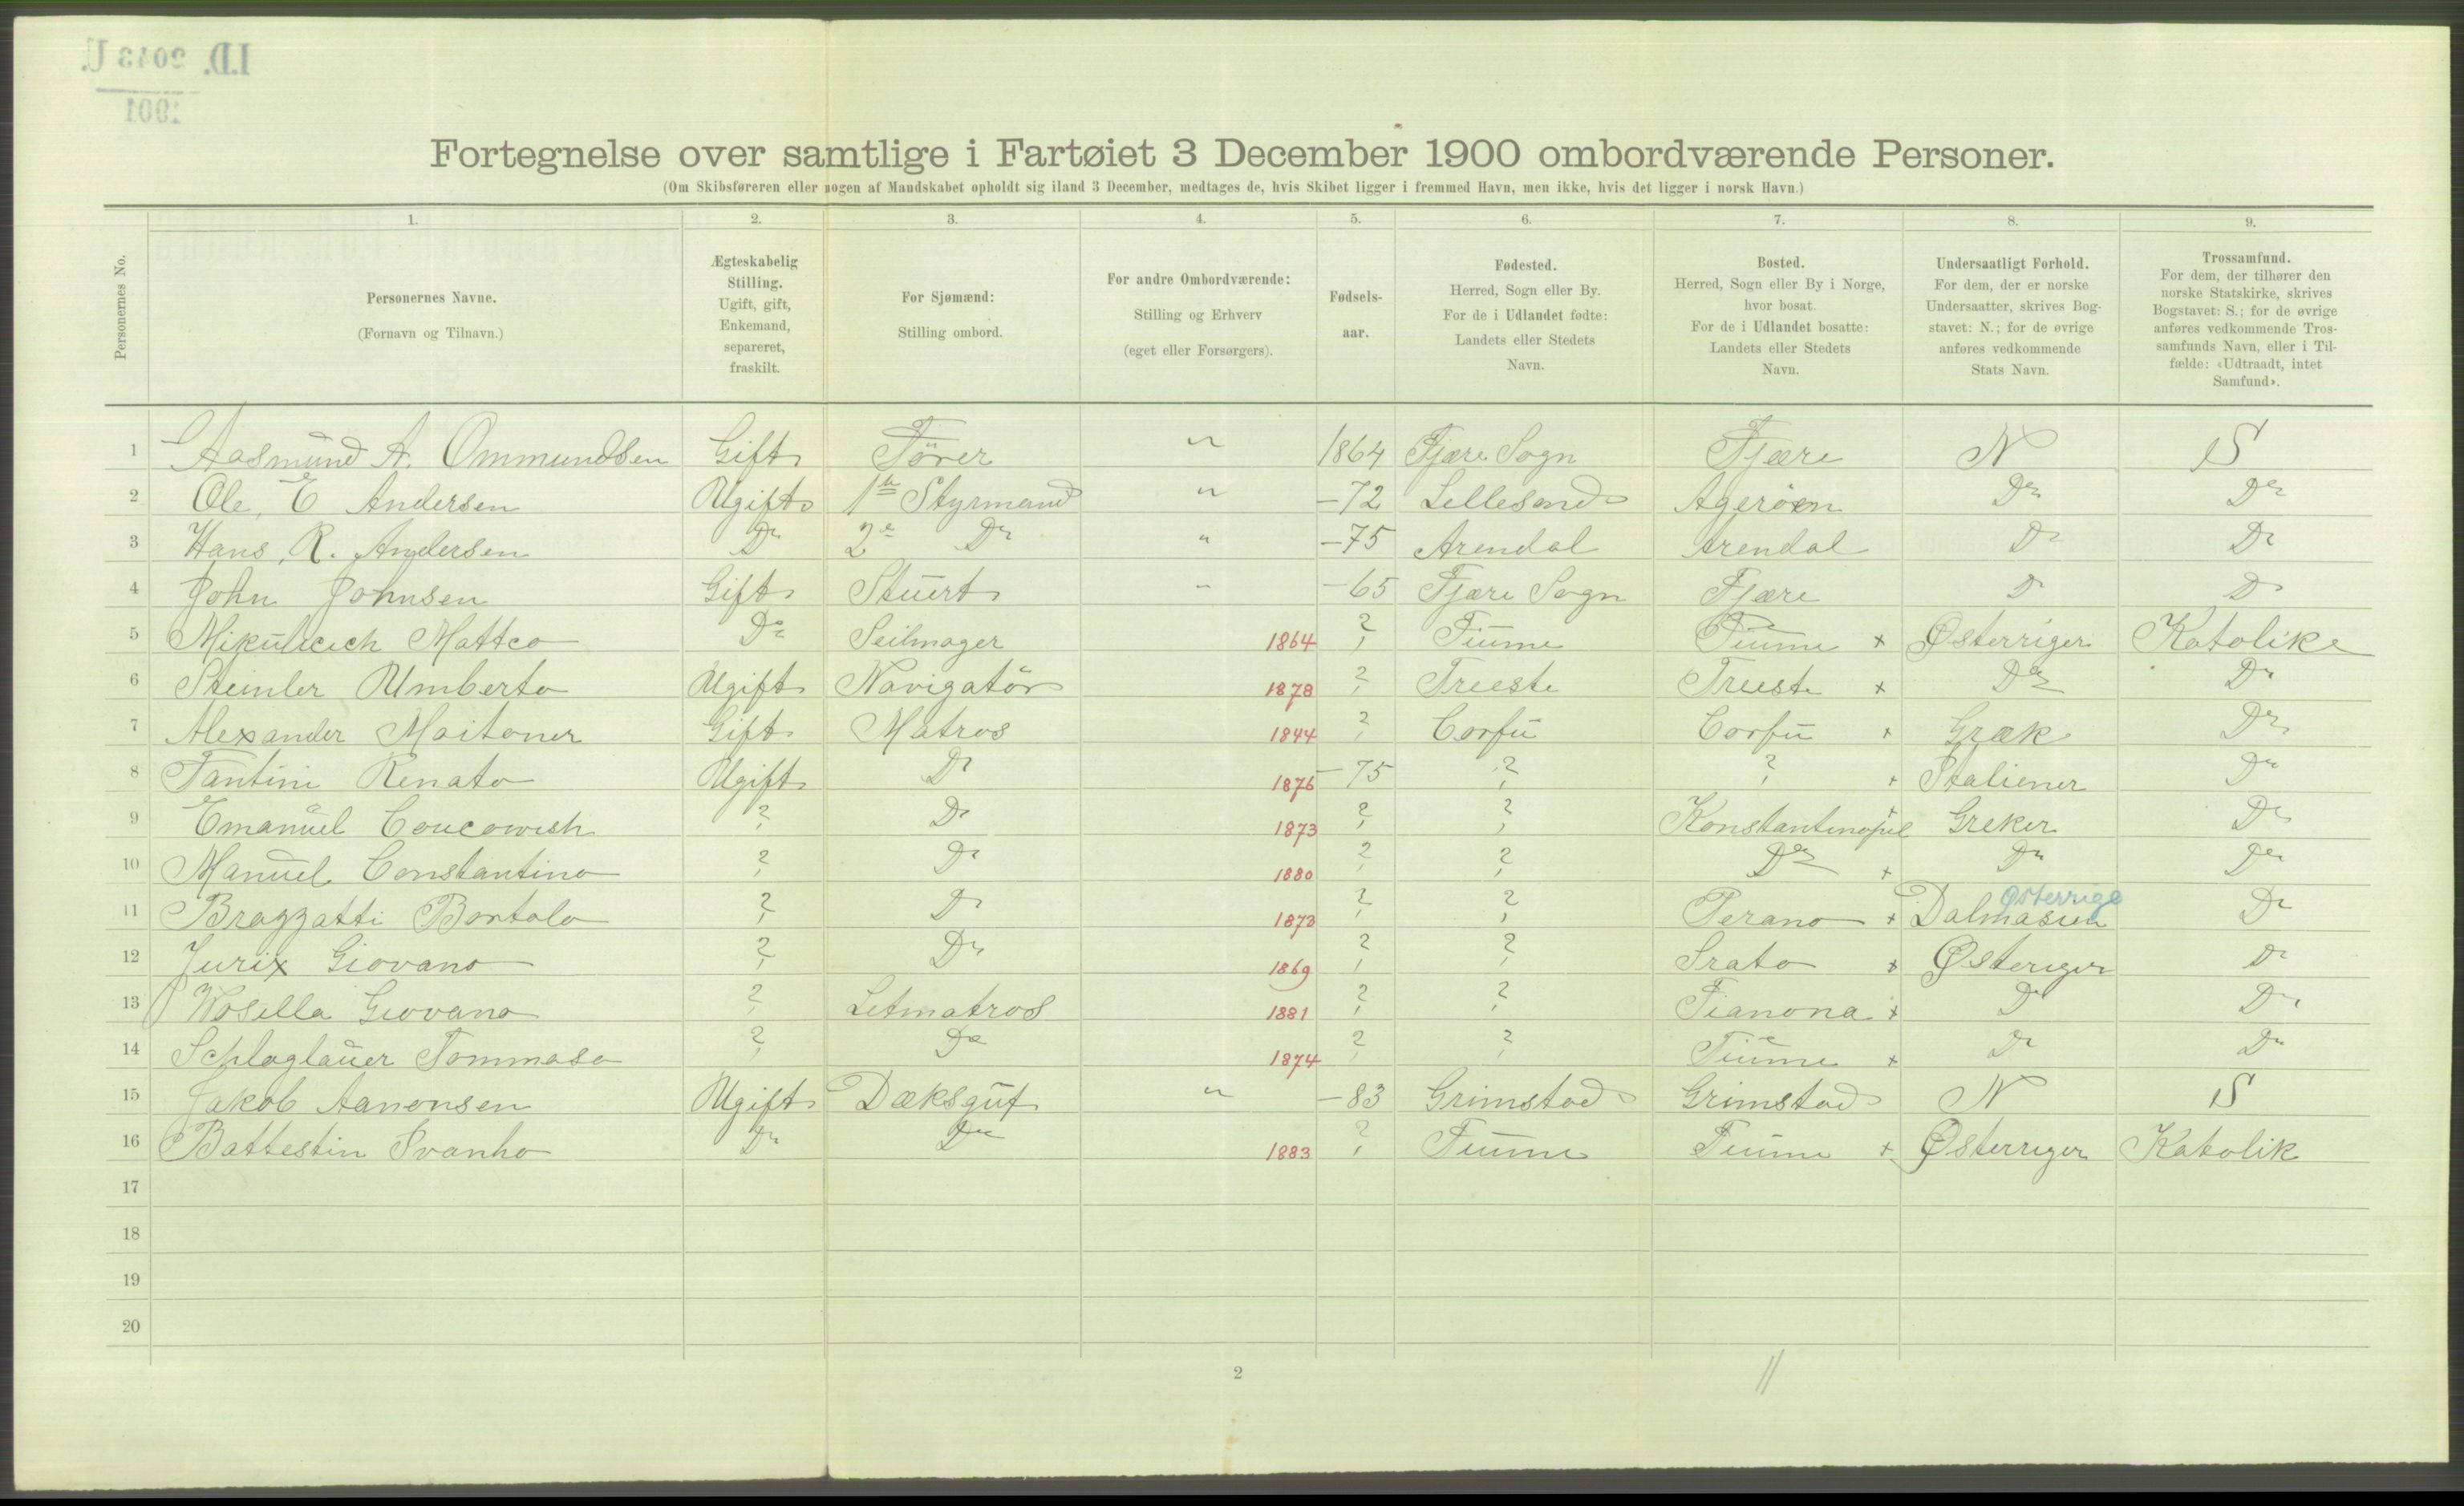 RA, 1900 Census - ship lists from ships in Norwegian harbours, harbours abroad and at sea, 1900, p. 5624